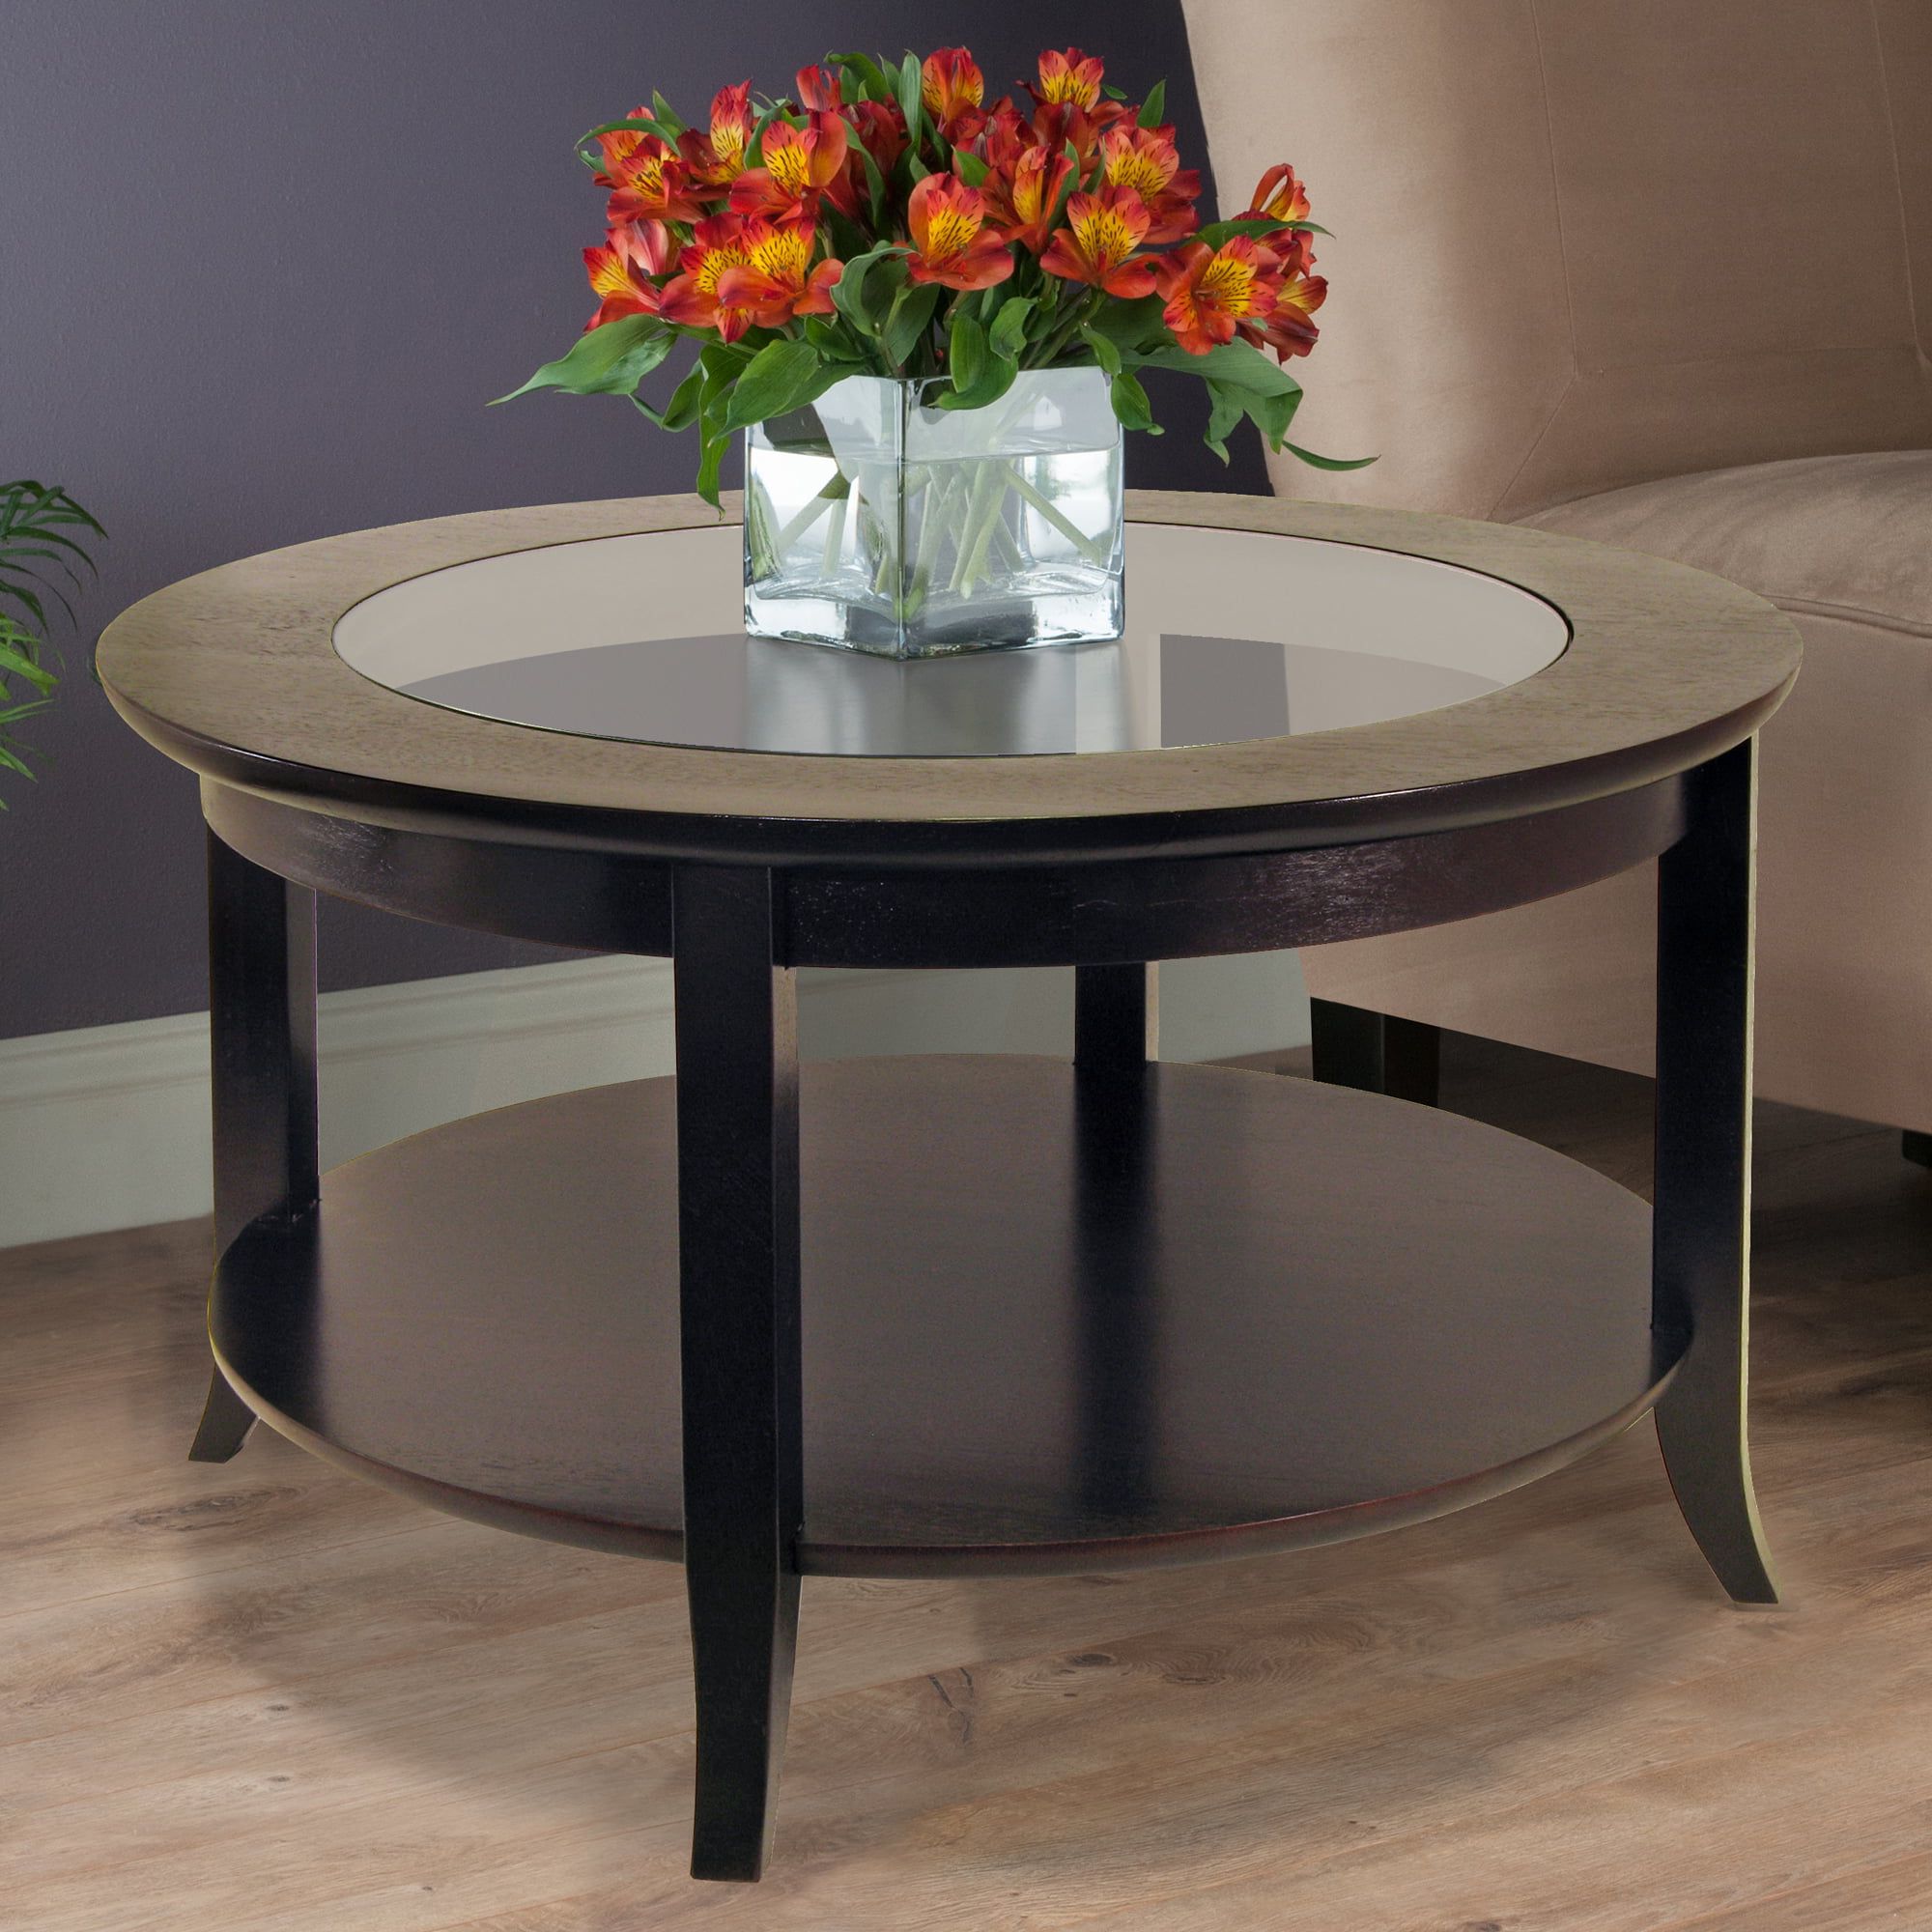 Winsome Wood Genoa Round Coffee Table With Glass Top, Espresso Finish Throughout Current Espresso Wood Finish Coffee Tables (Photo 1 of 15)